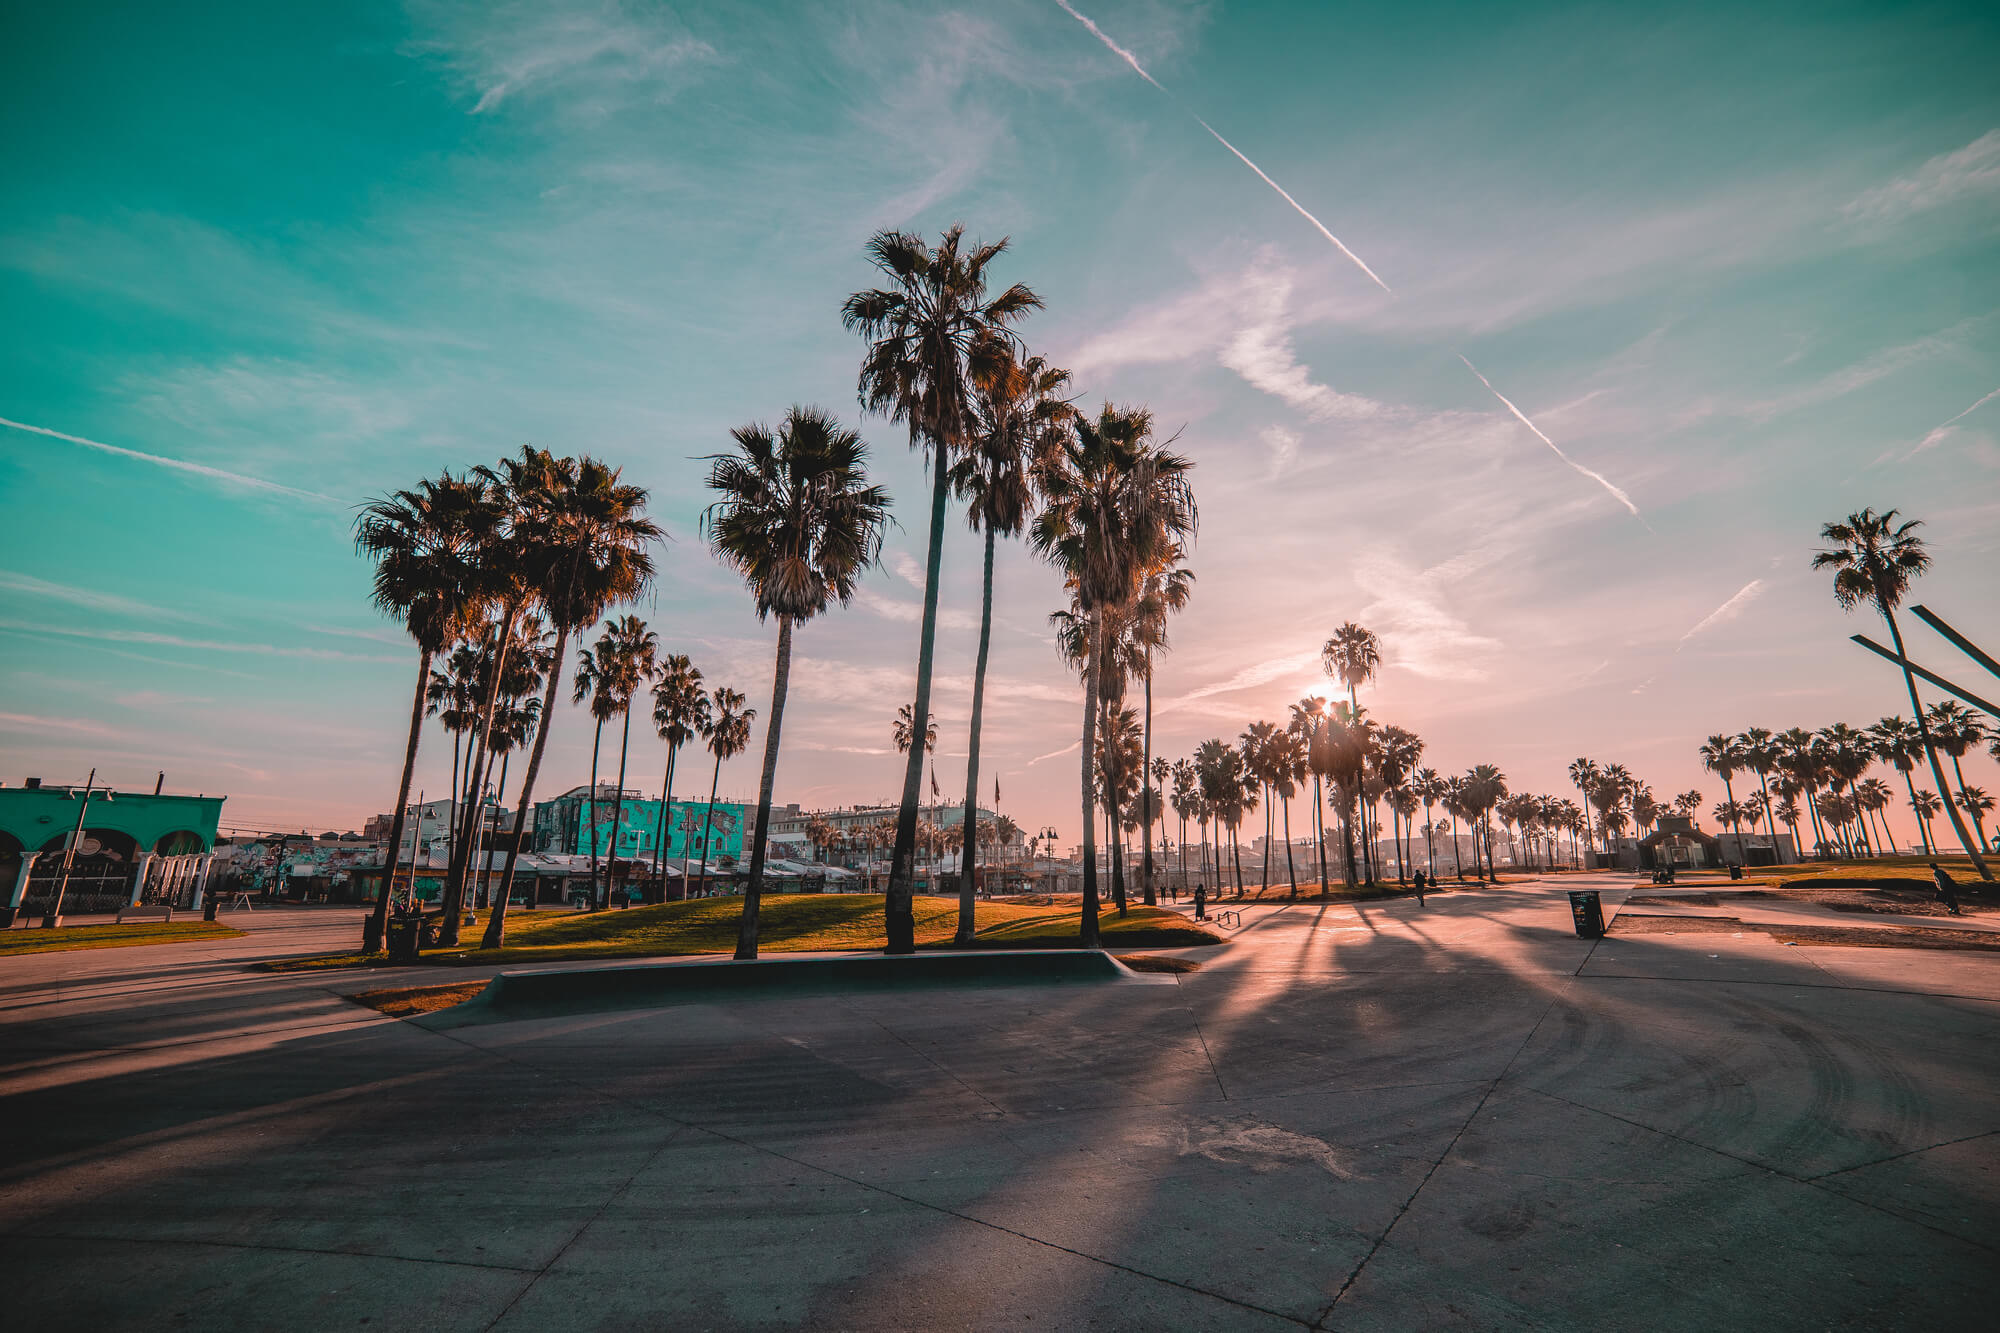 An iconic view of the palm trees at Venice beach in LA - home to one of the top 5 luxury vacation villas in California